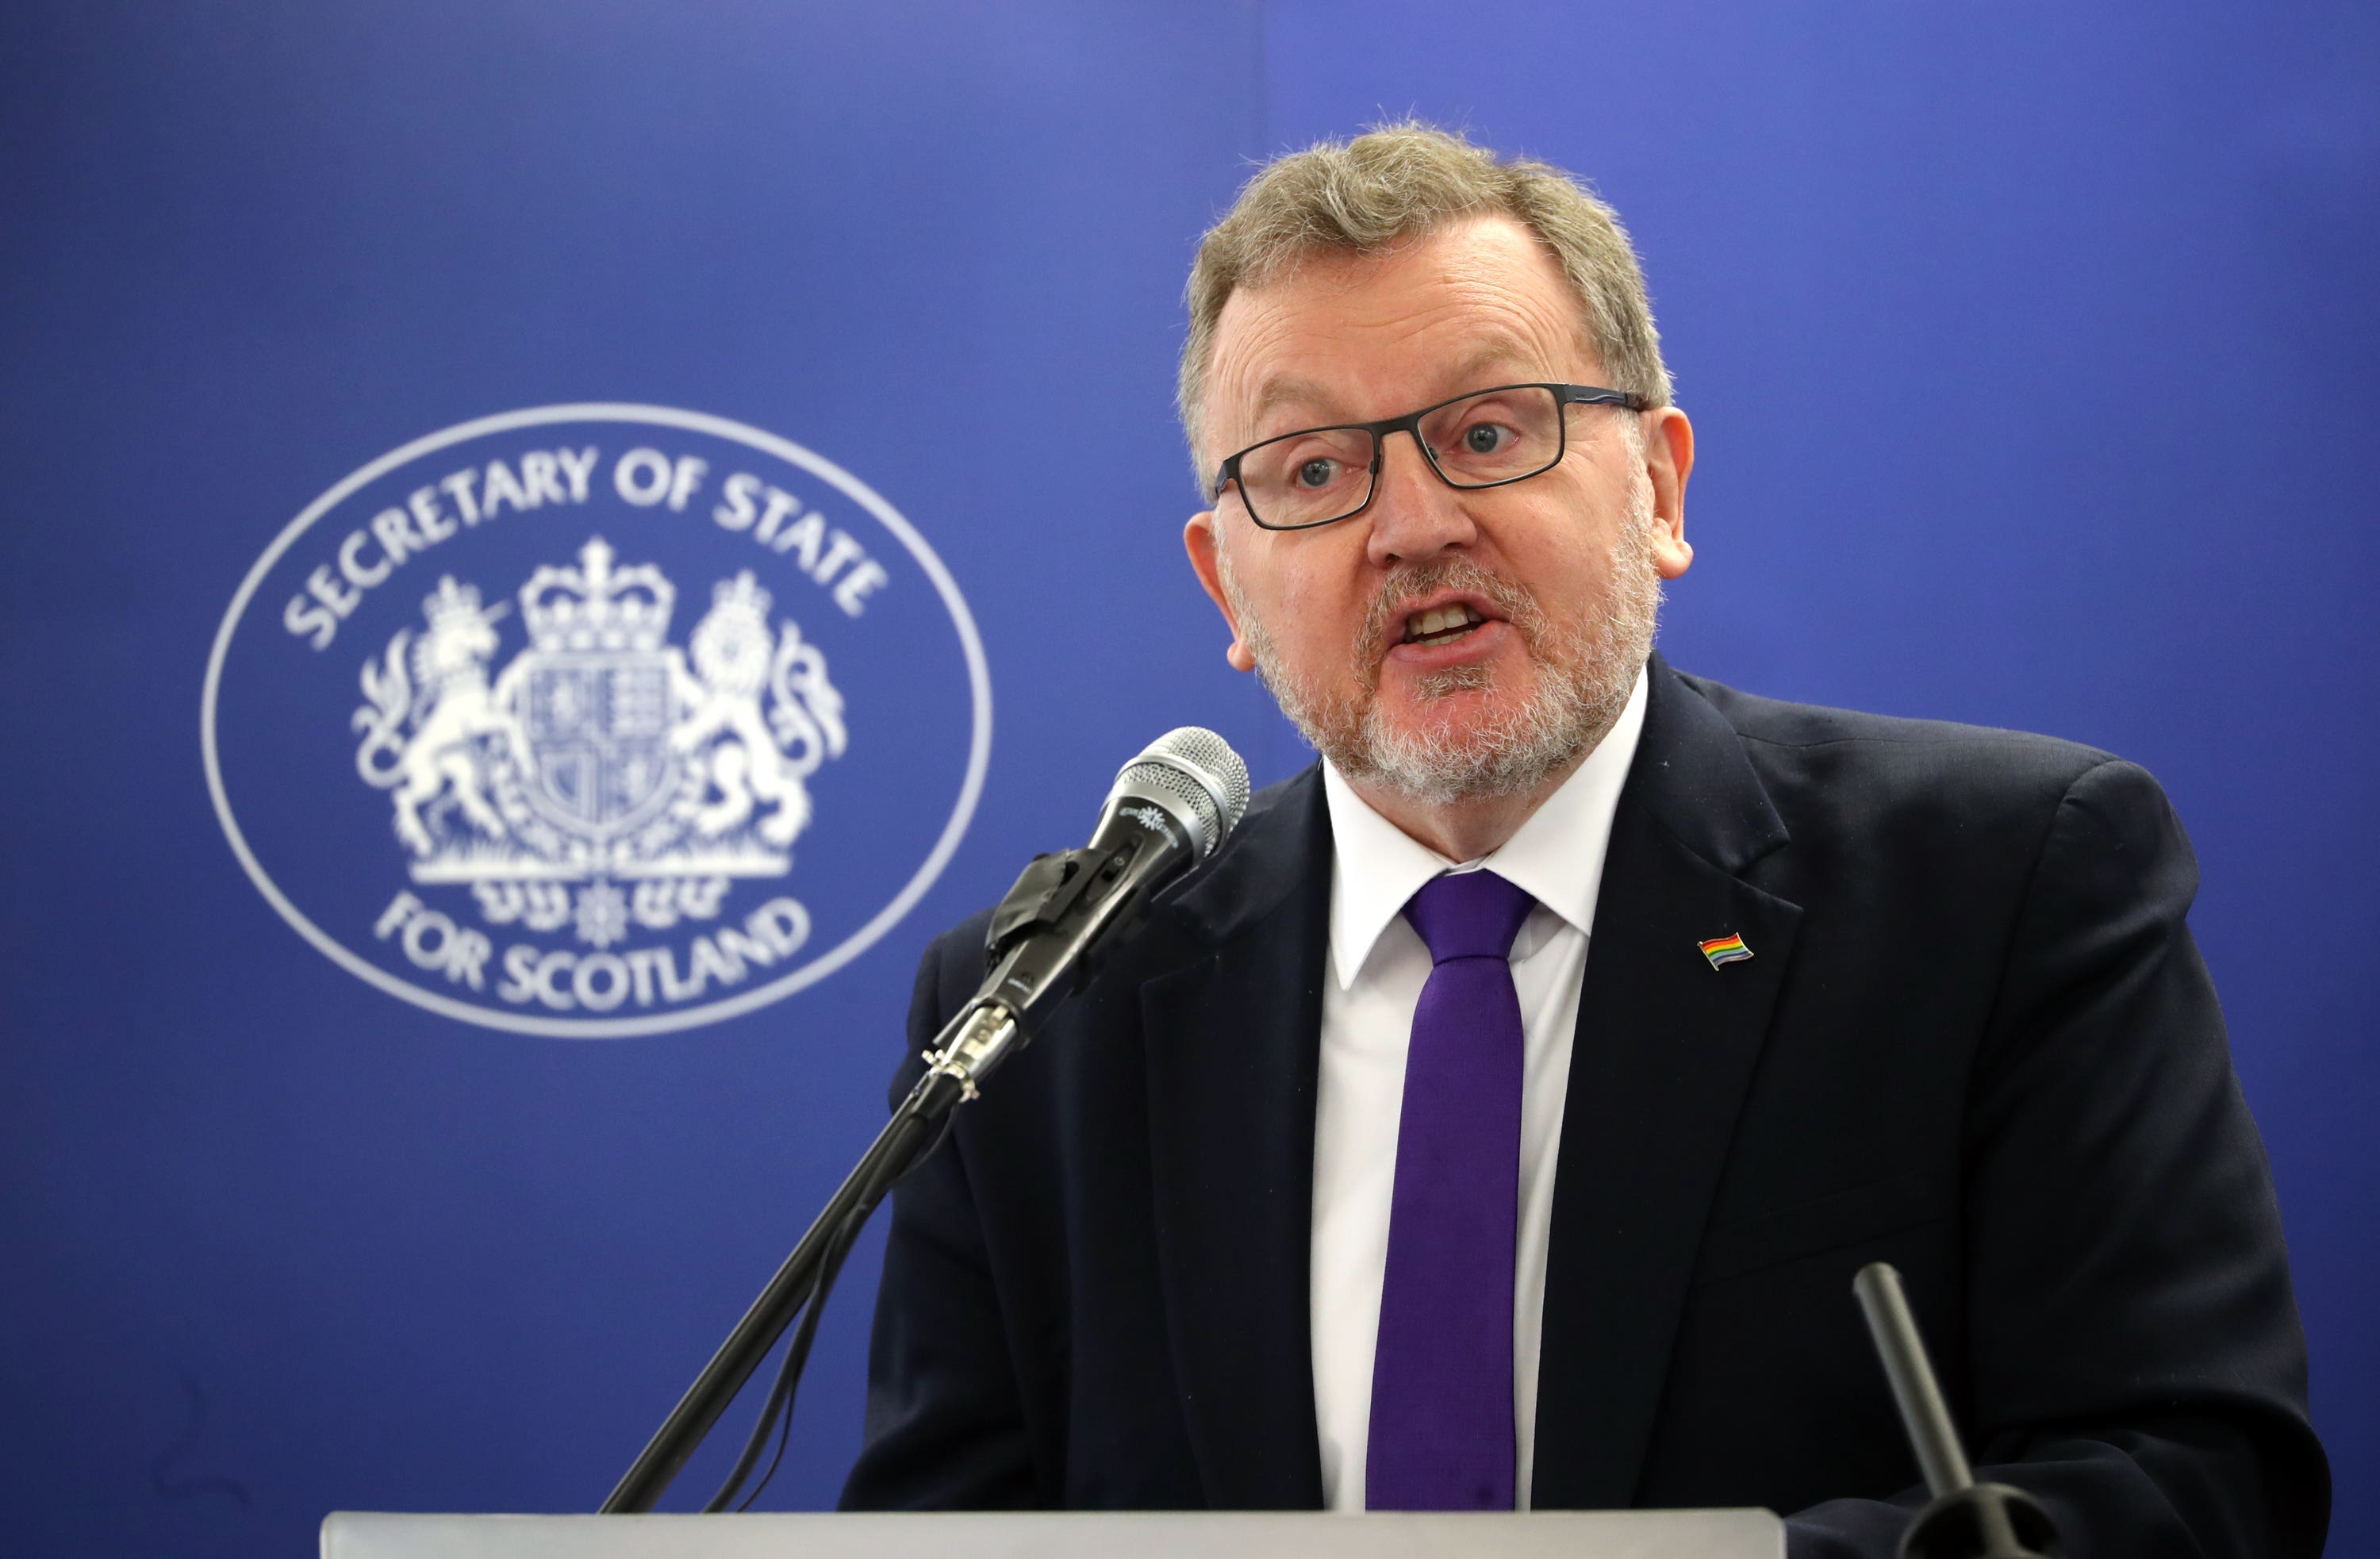 Tory David Mundell was an MSP from 1999 to 2005, when he switched to Westminster, later becoming Scottish secretary